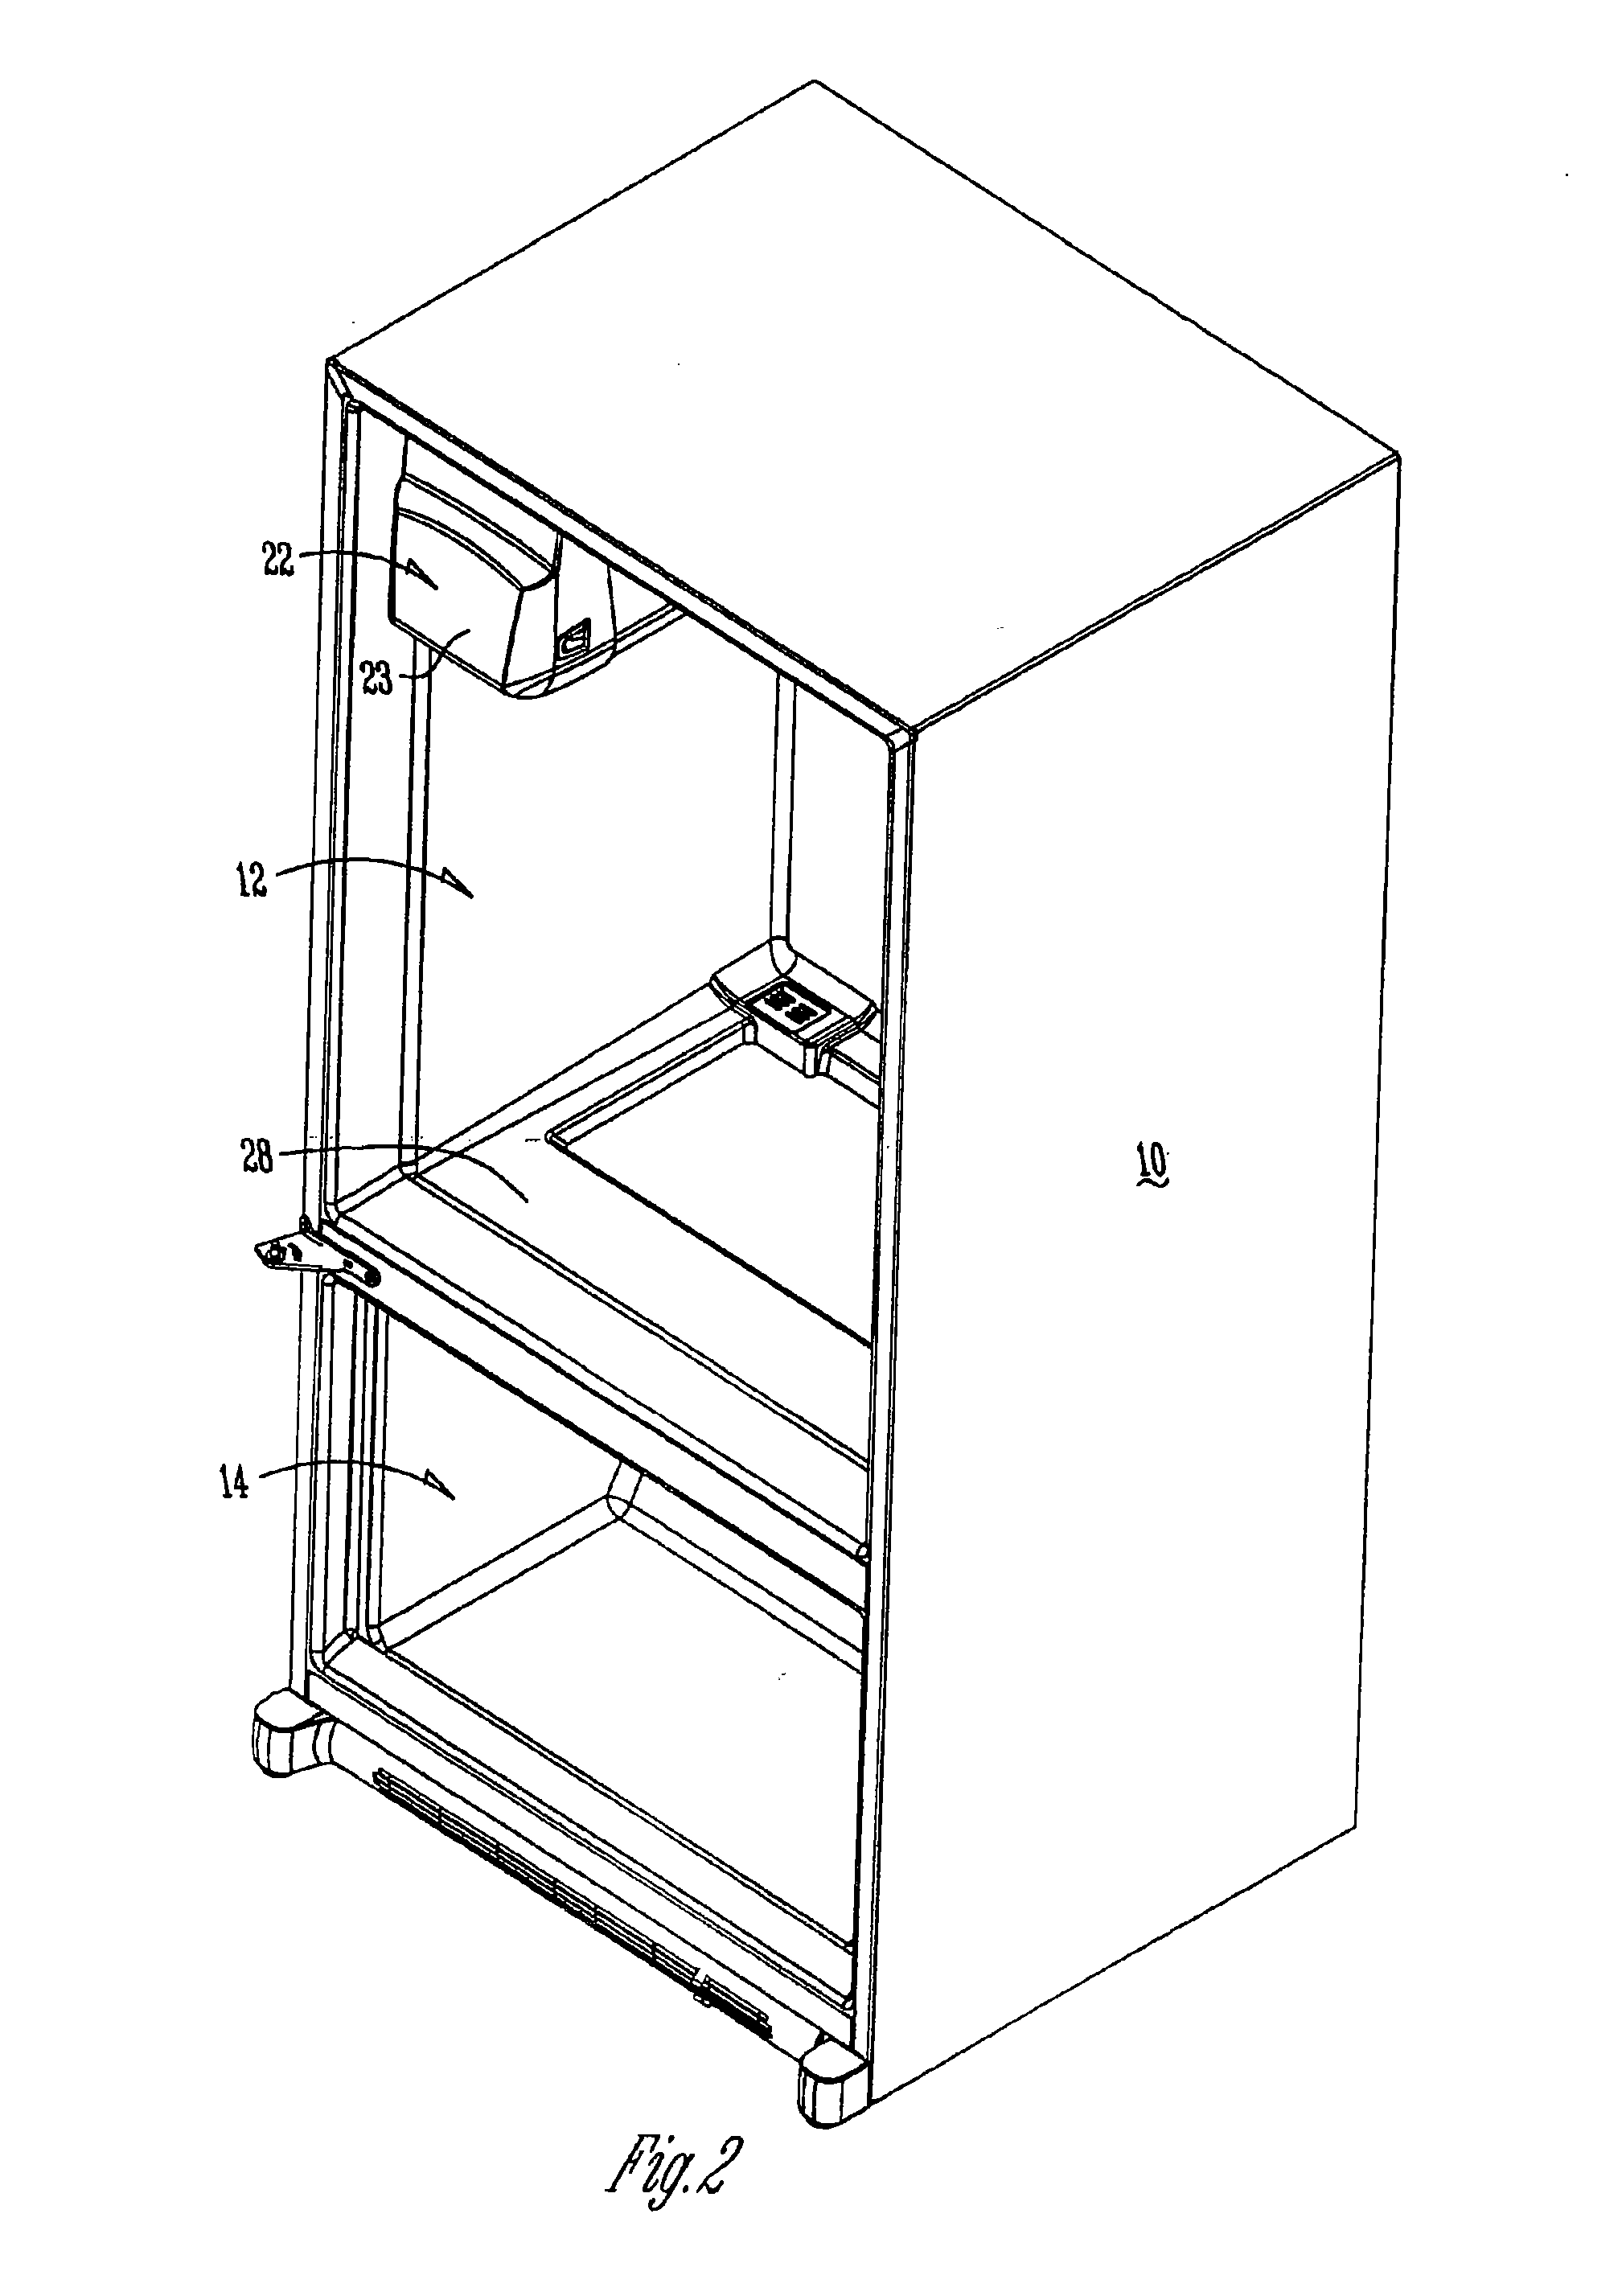 Refrigerator with improved water fill tube for ice maker